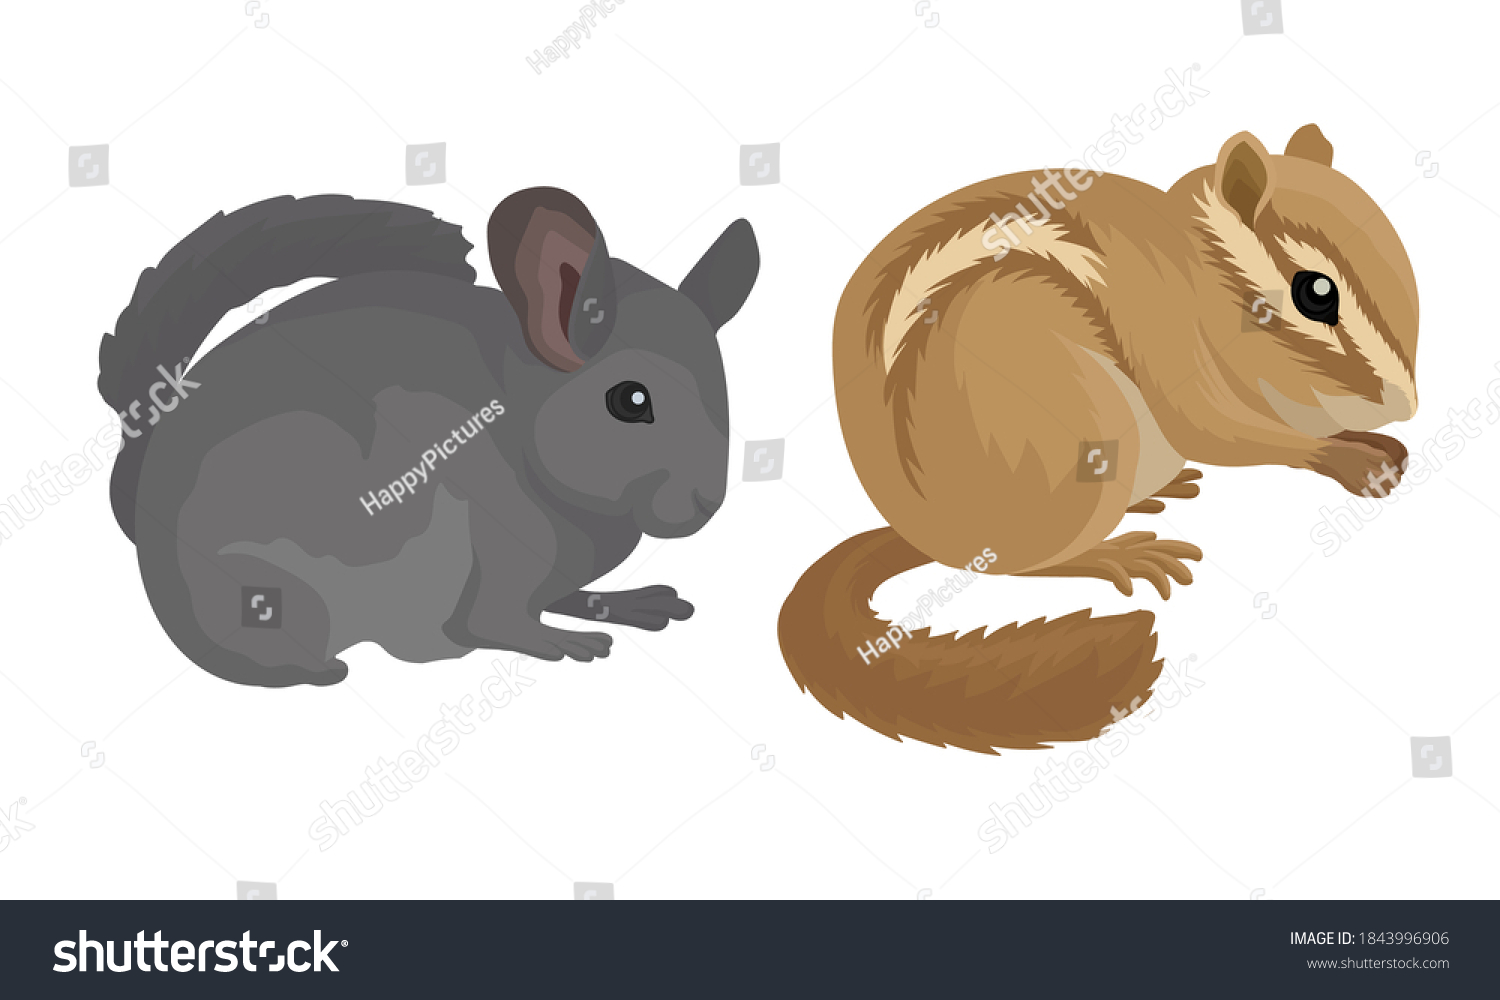 SVG of Rodents with Robust Bodies and Short Limbs Vector Set svg